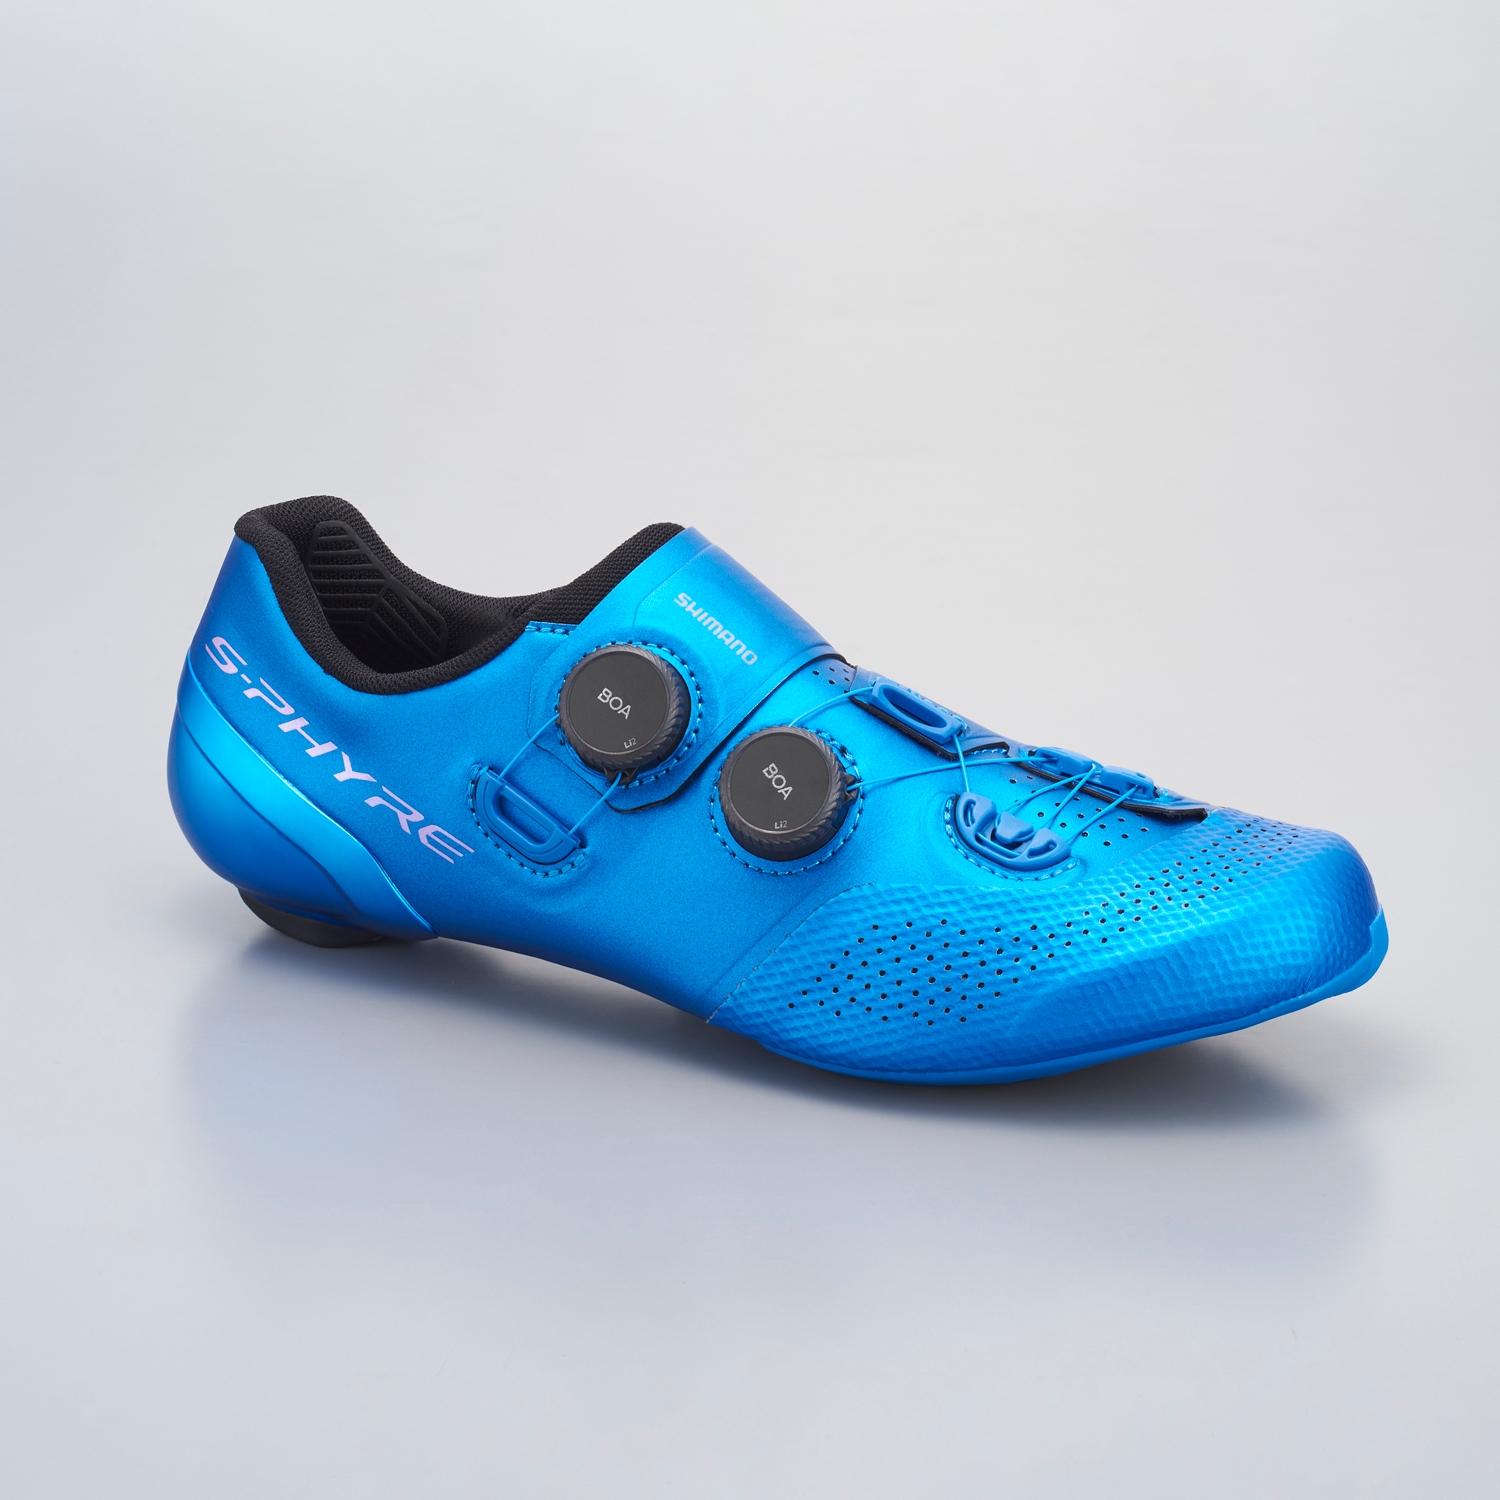 New Shimano S-Phyre RC902 shoes hit - Canadian Cycling Magazine